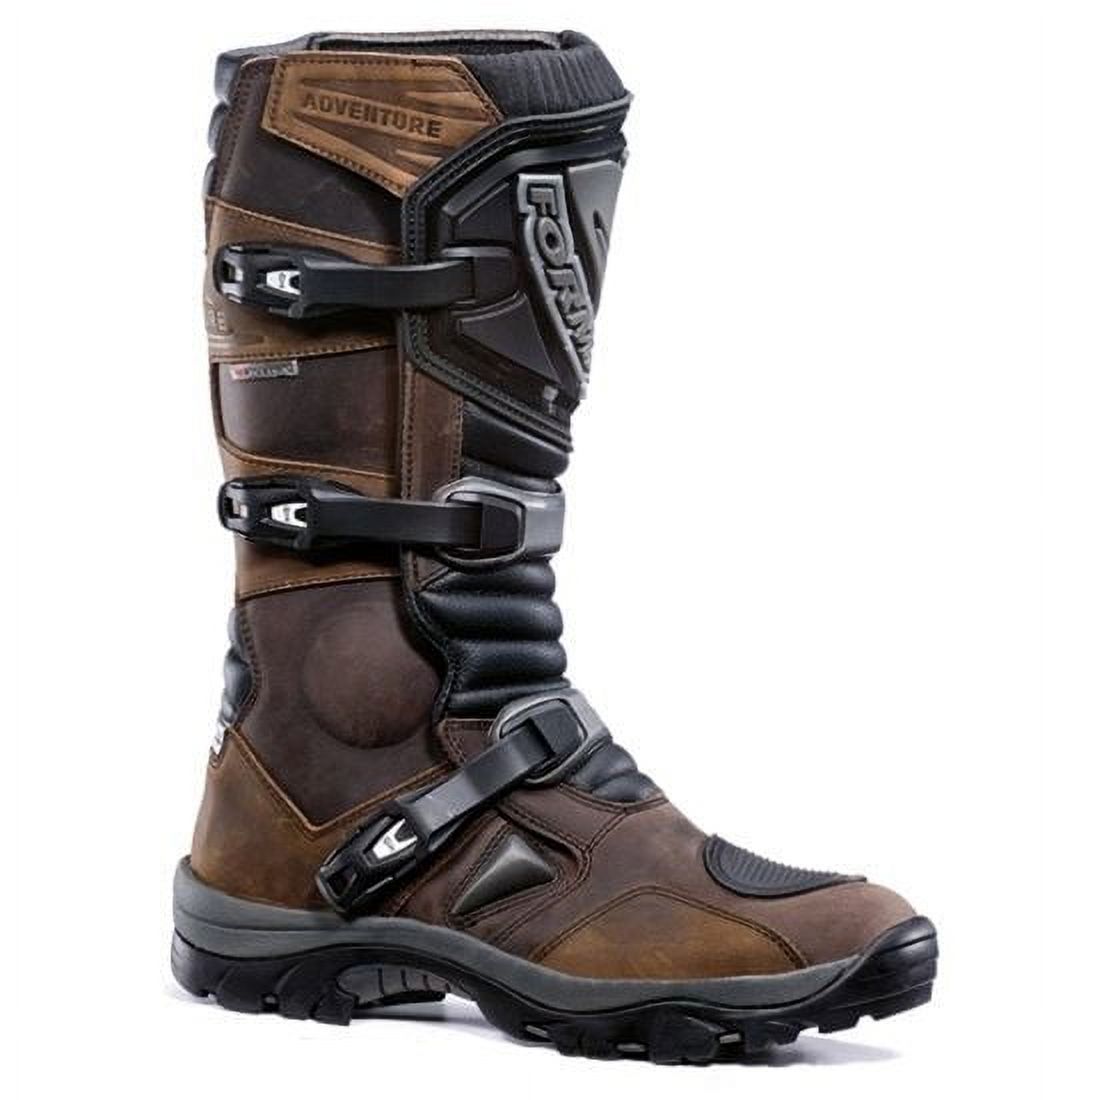 Forma Adventure Touring Motorcycle Riding Boots - Brown - FOADVBN - image 1 of 1